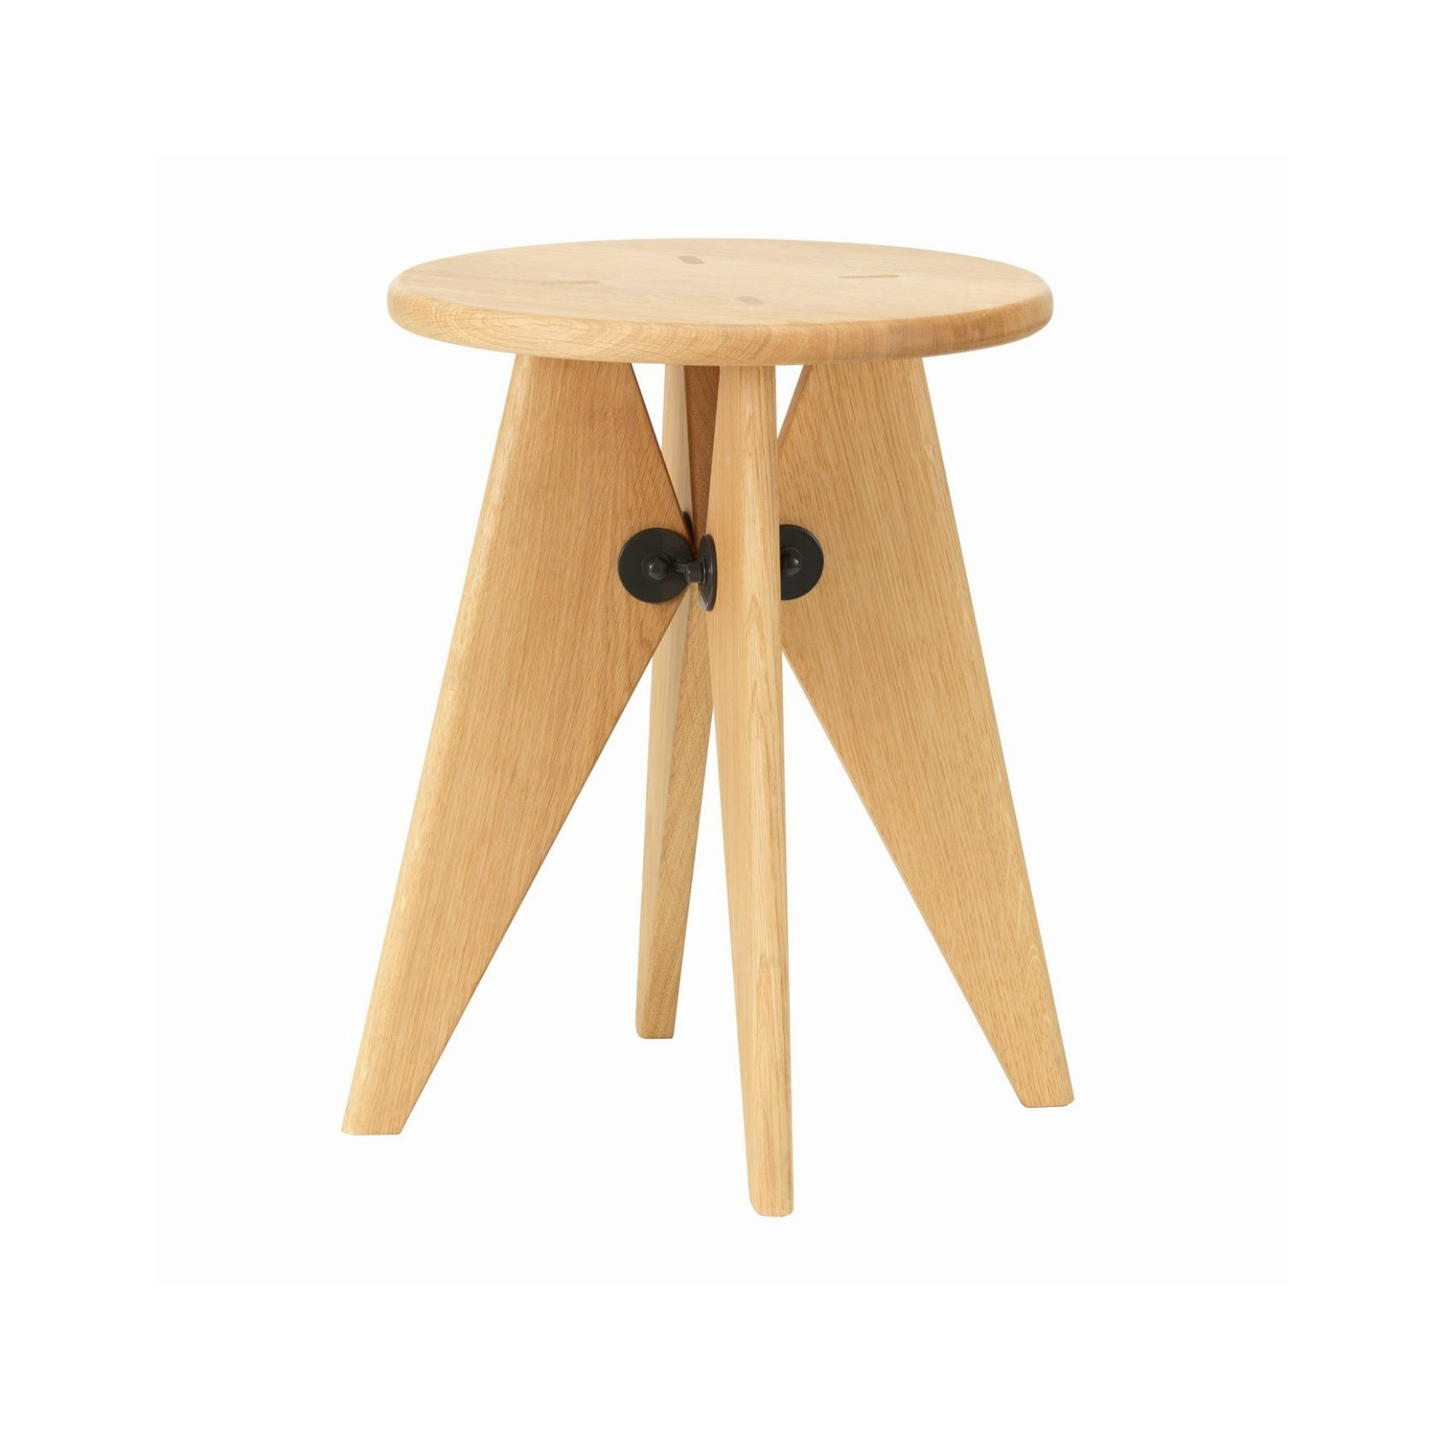 Vitra Tabouret Bois Natural Solid Oak All wood Stool Chair